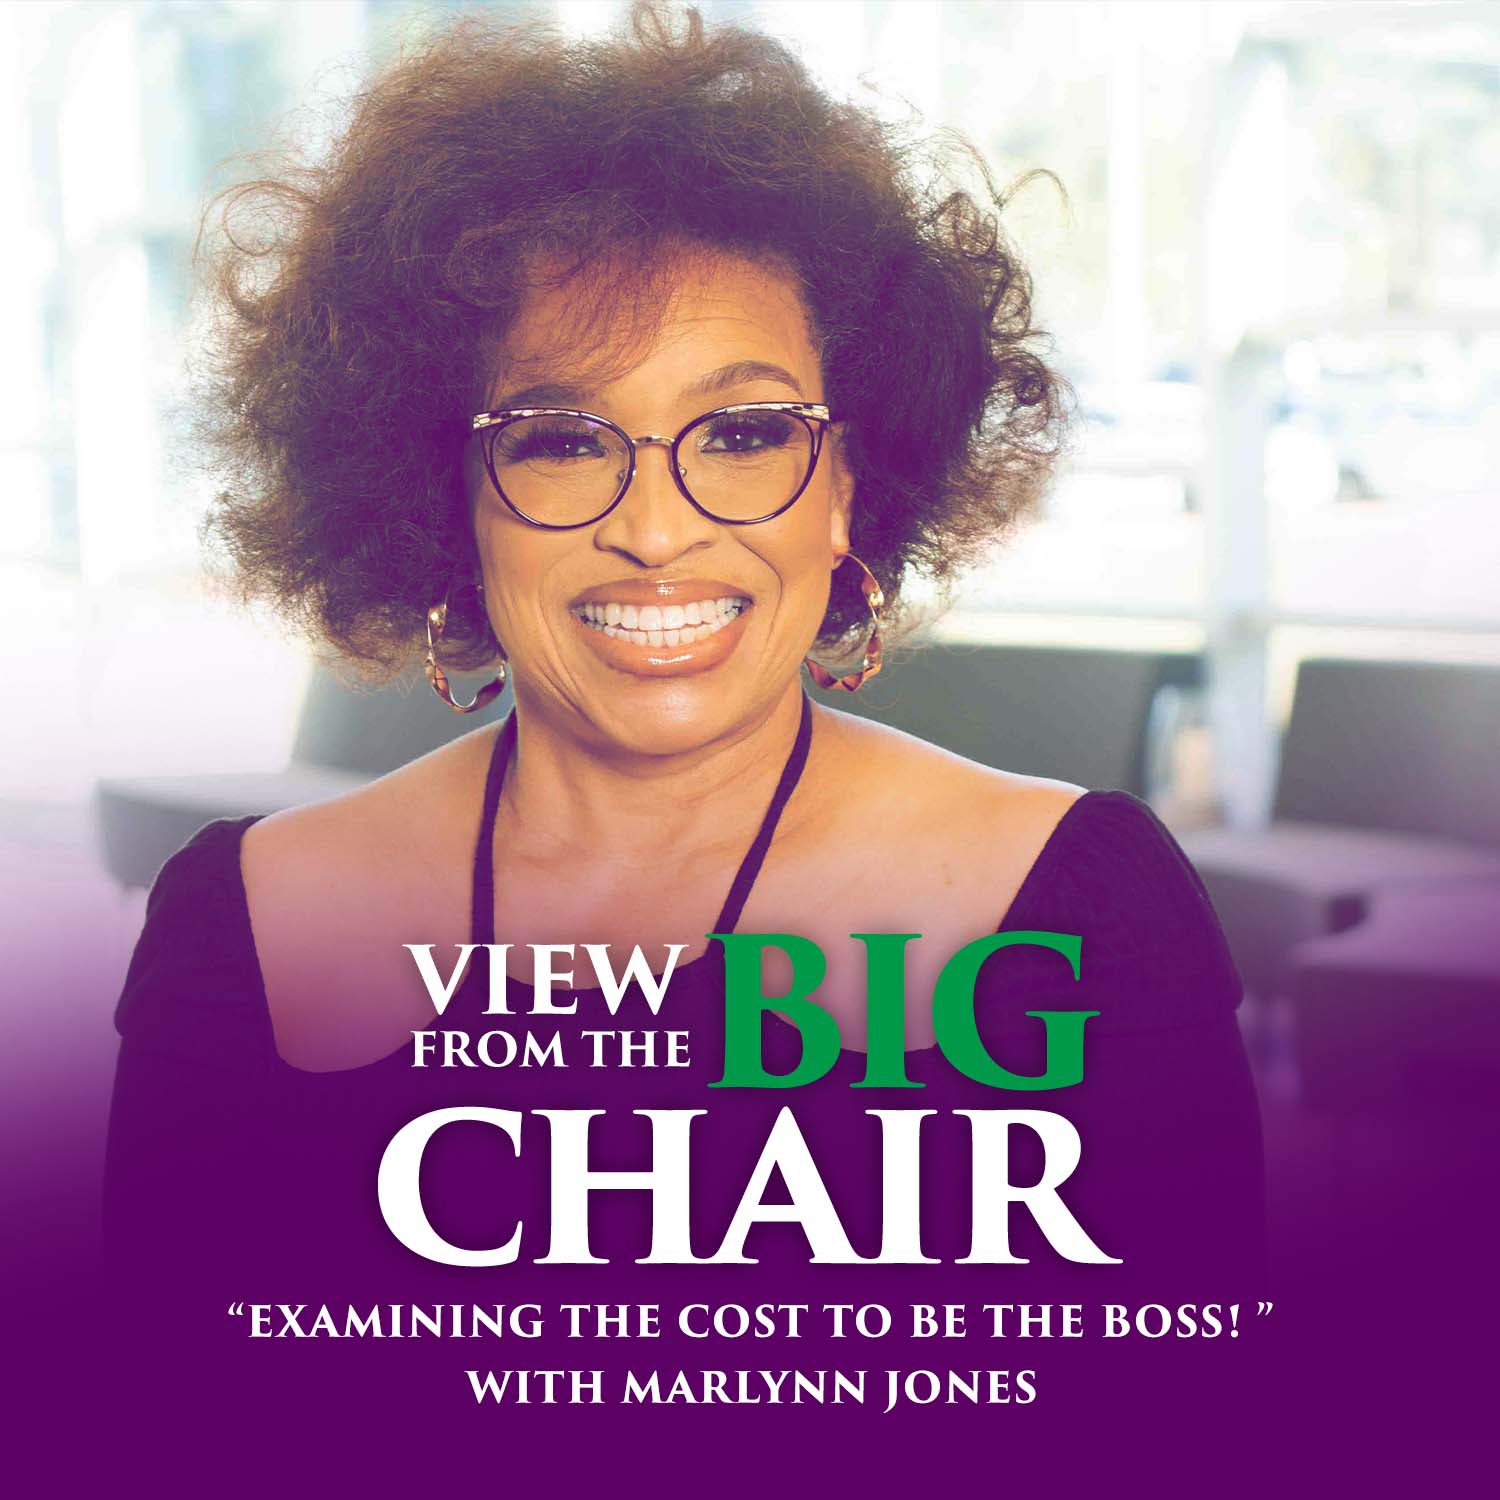 Artwork for View from the Big Chair!